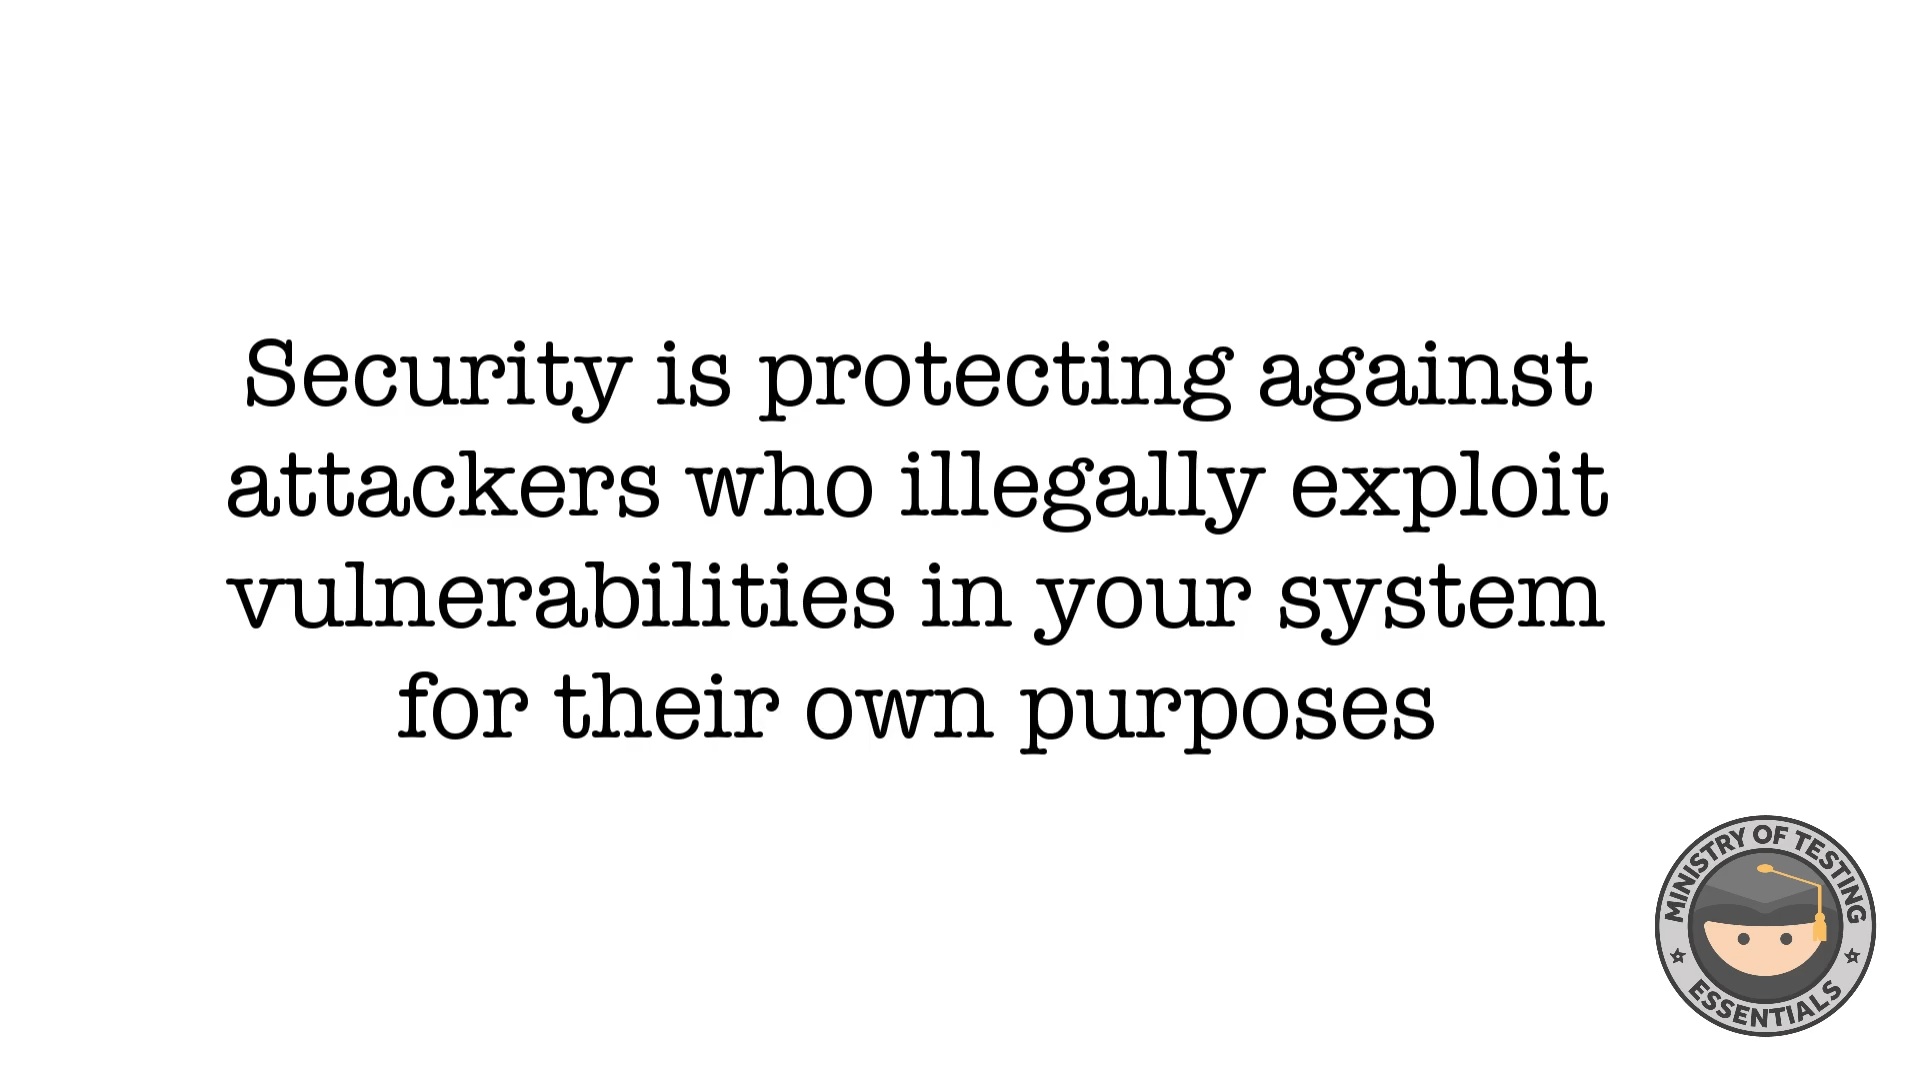 What is Security?